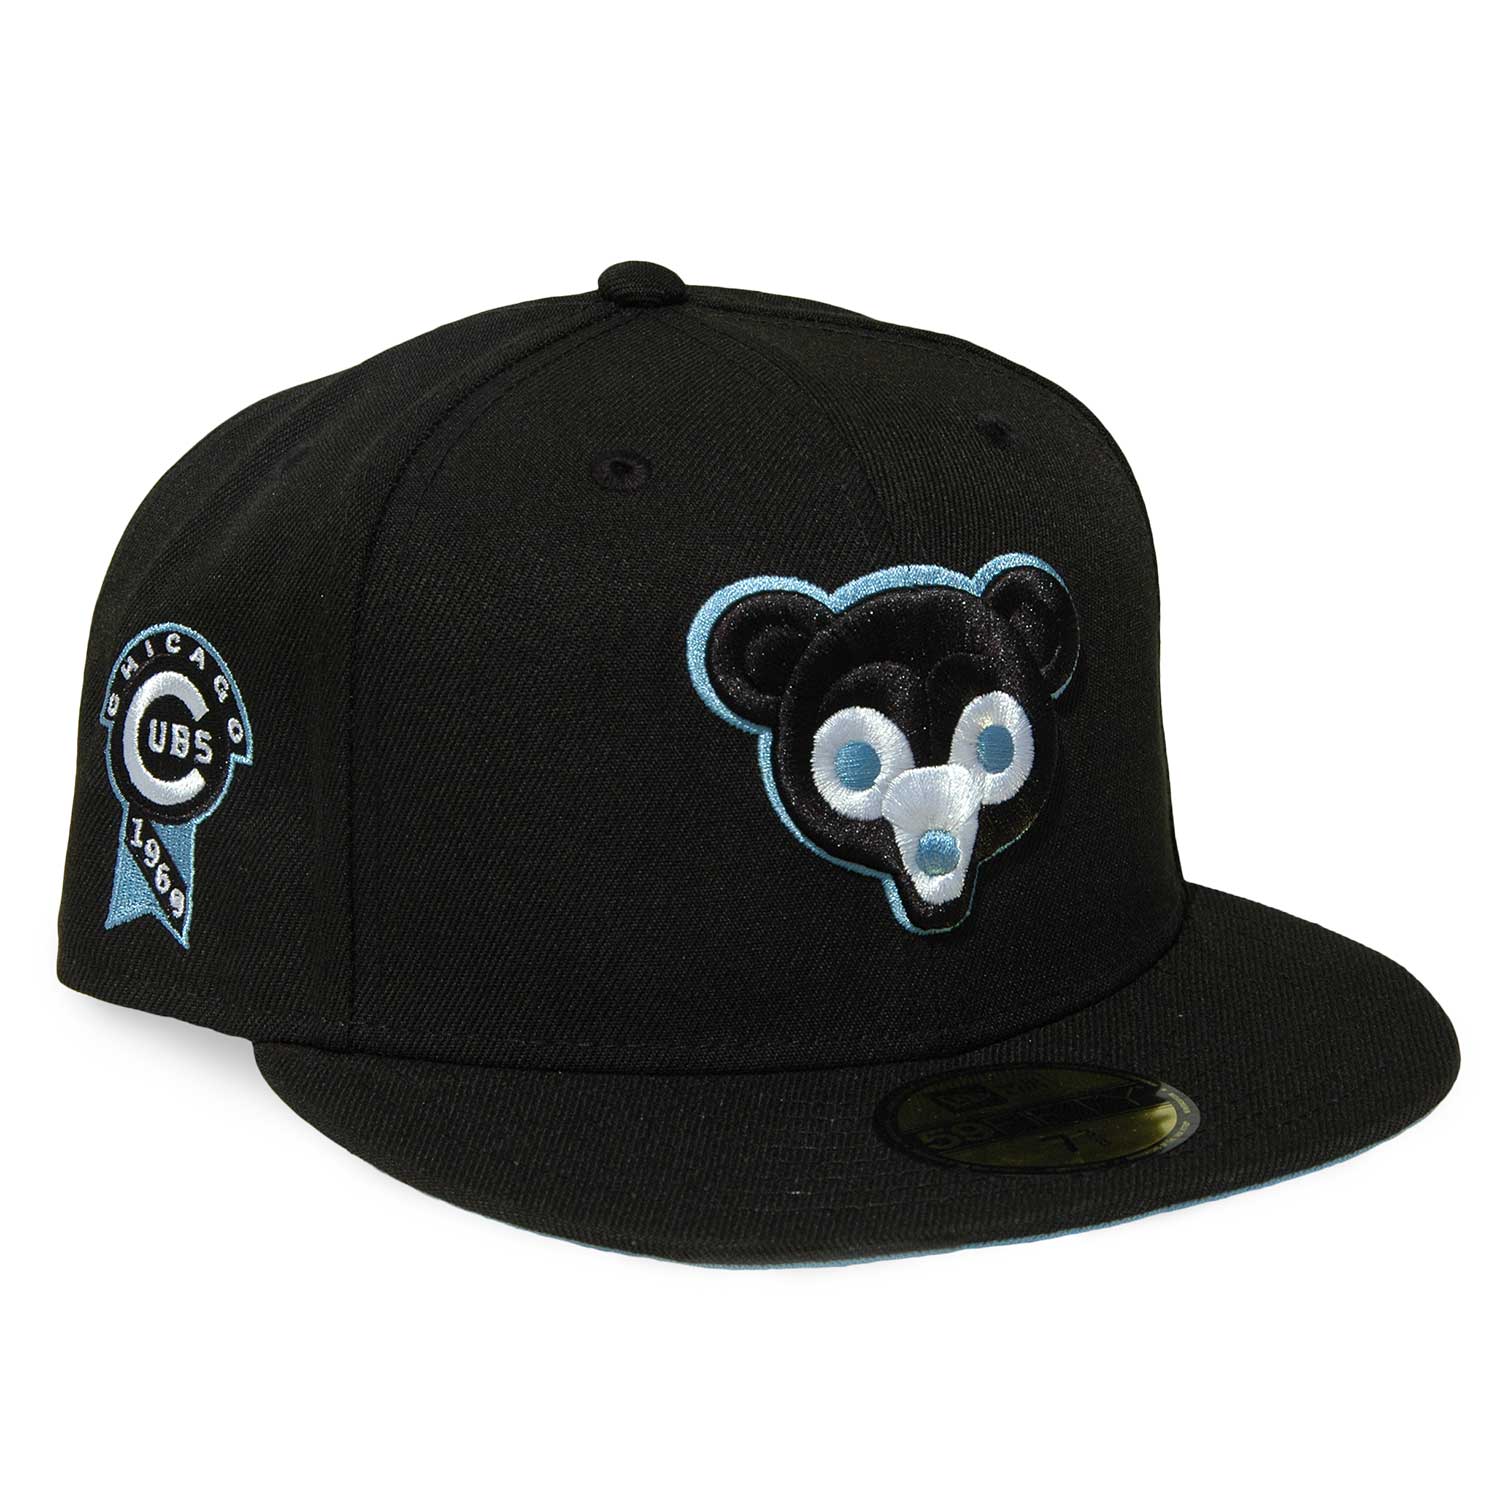 Chicago Cubs 1969 Black & Baby Blue 59FIFTY Fitted Cap 7 7/8 = 24 5/8 in = 62.5 cm